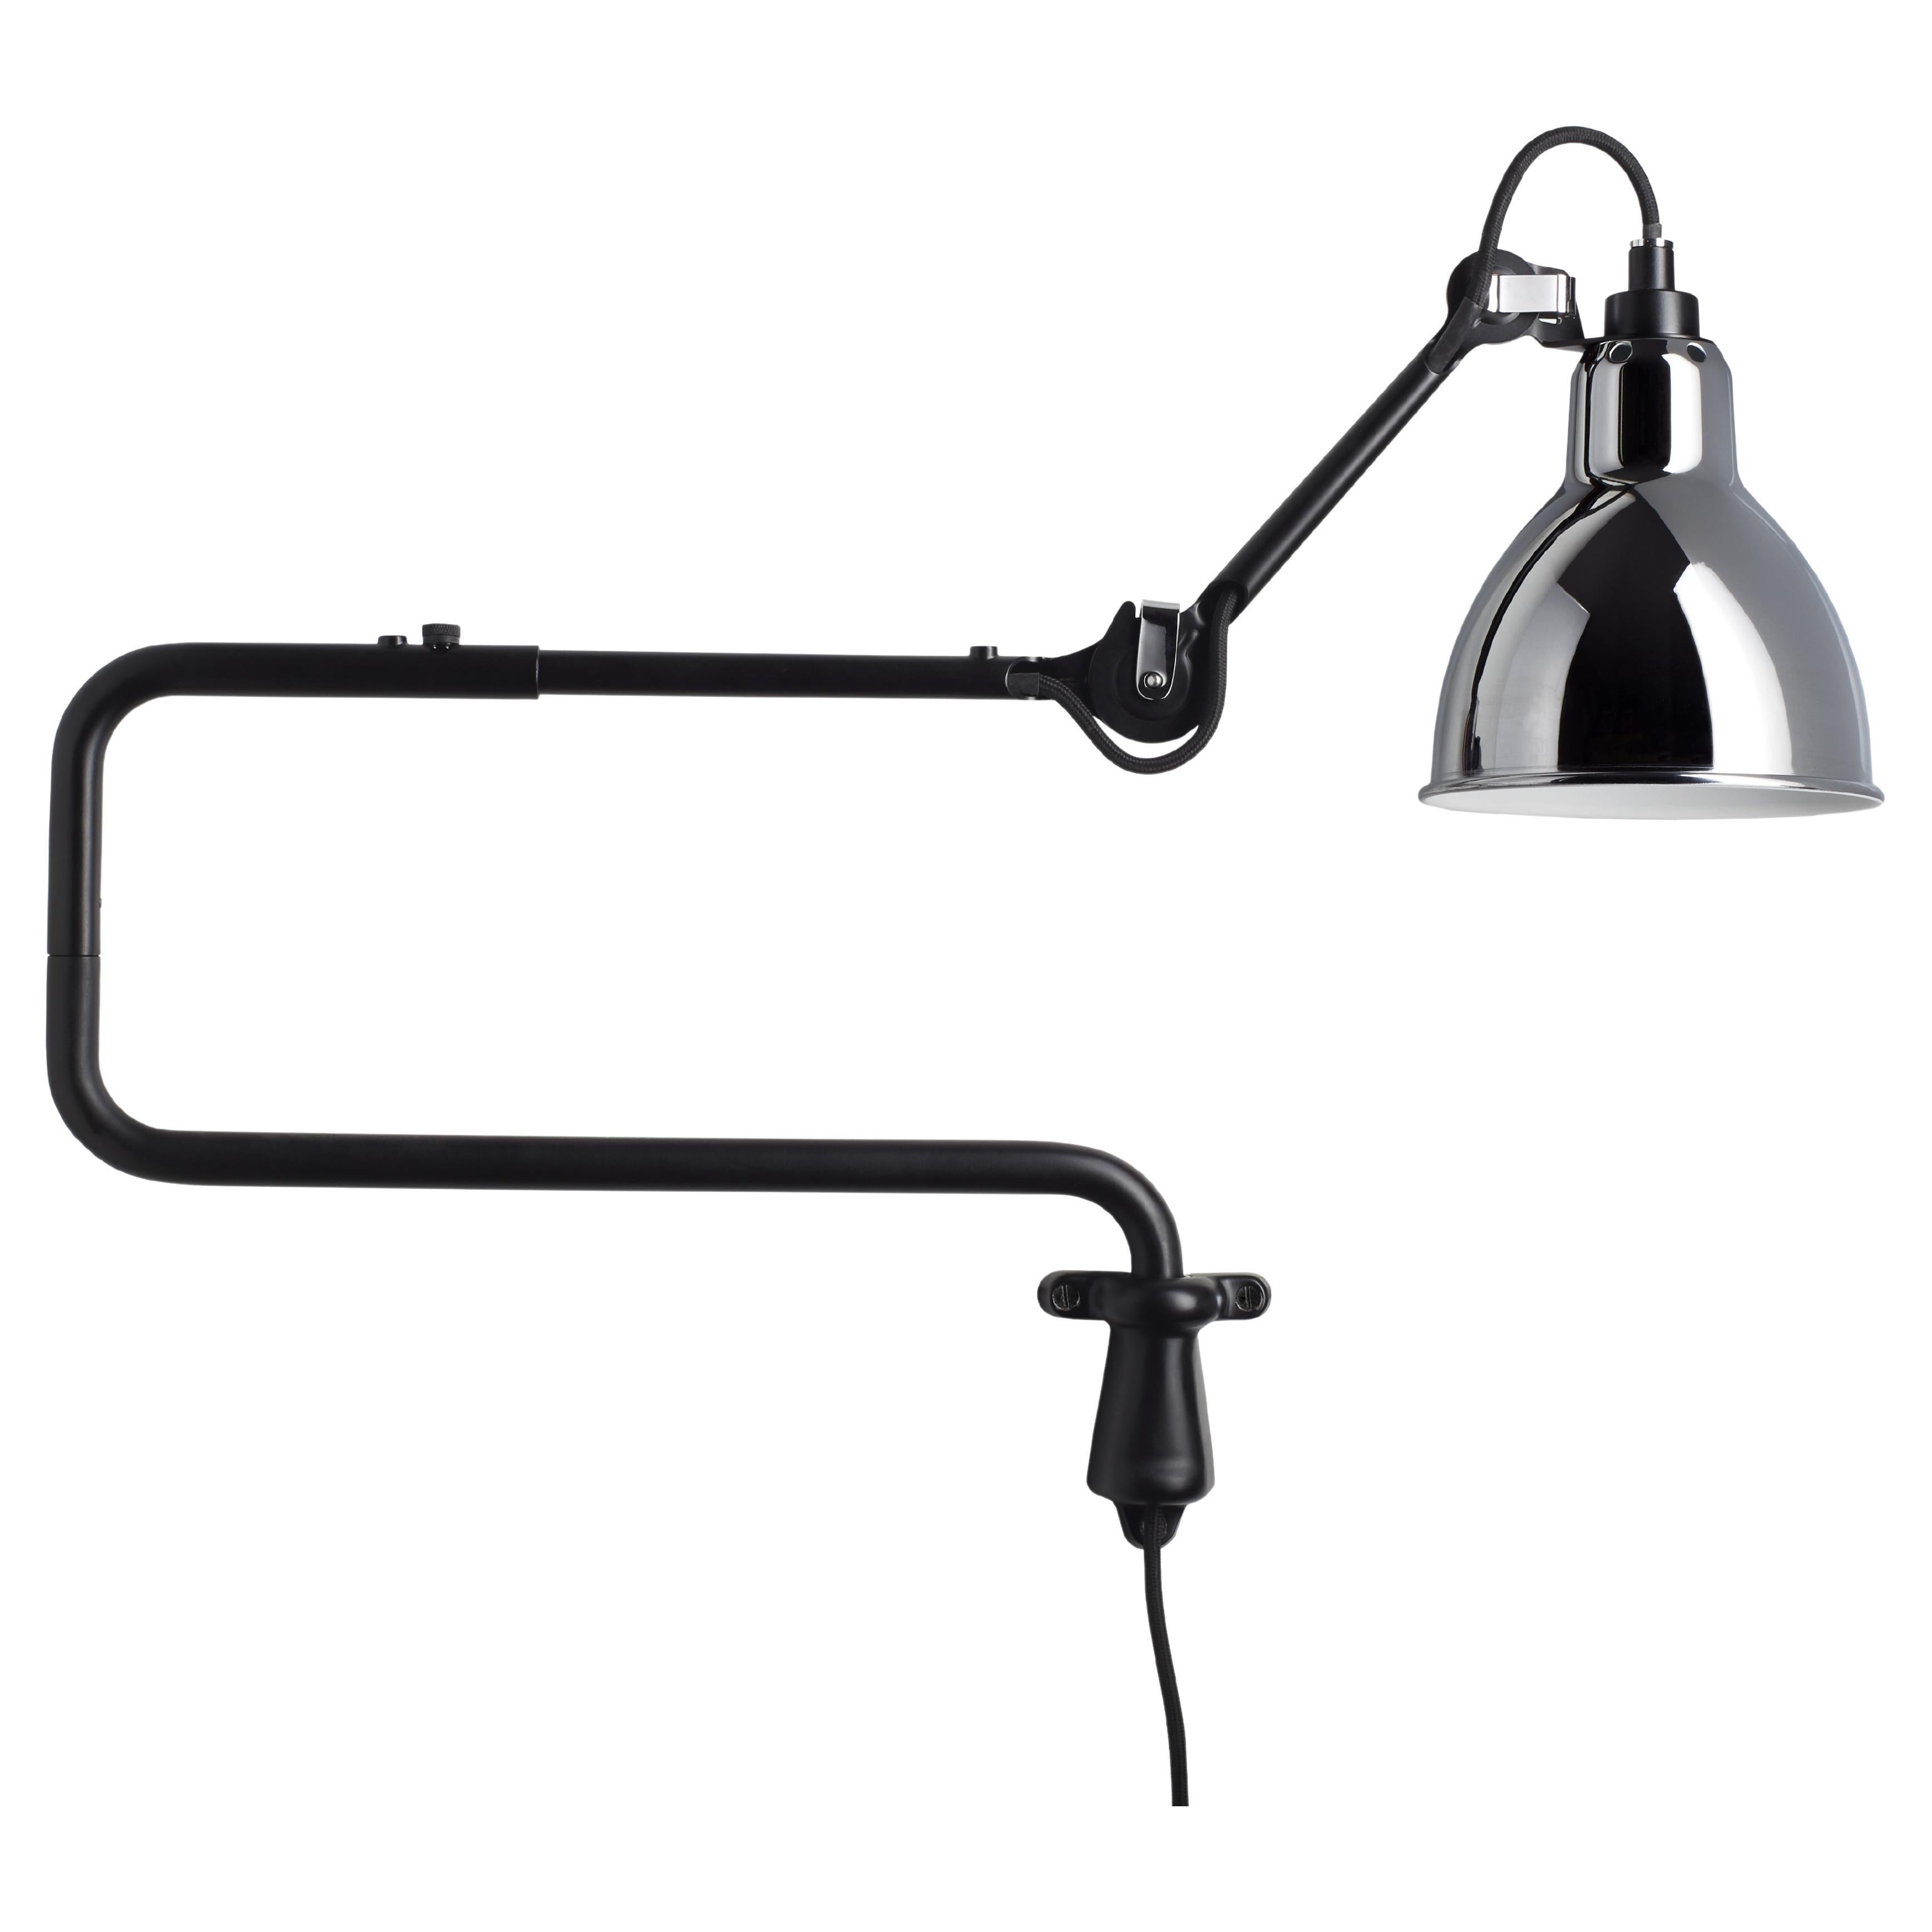 DCW Editions La Lampe Gras N°303 Wall Lamp in Black Arm and Chrome Shade